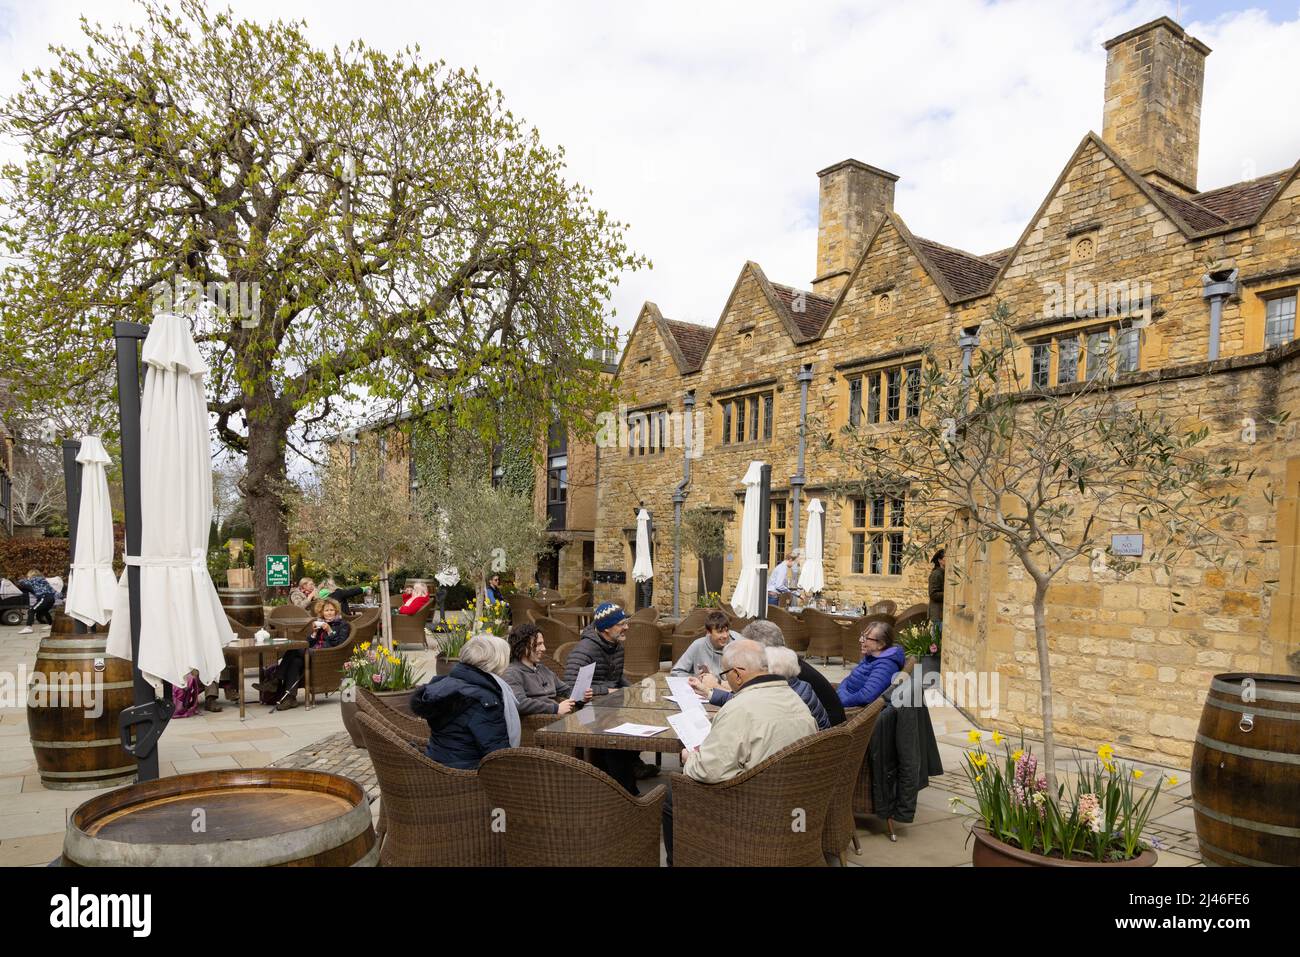 Cotswold Hotel; people sitting drinking in the courtyard of The Lygon Arms, a 14th century Hotel, Broadway Village, Cotswolds Worcestershire UK Stock Photo